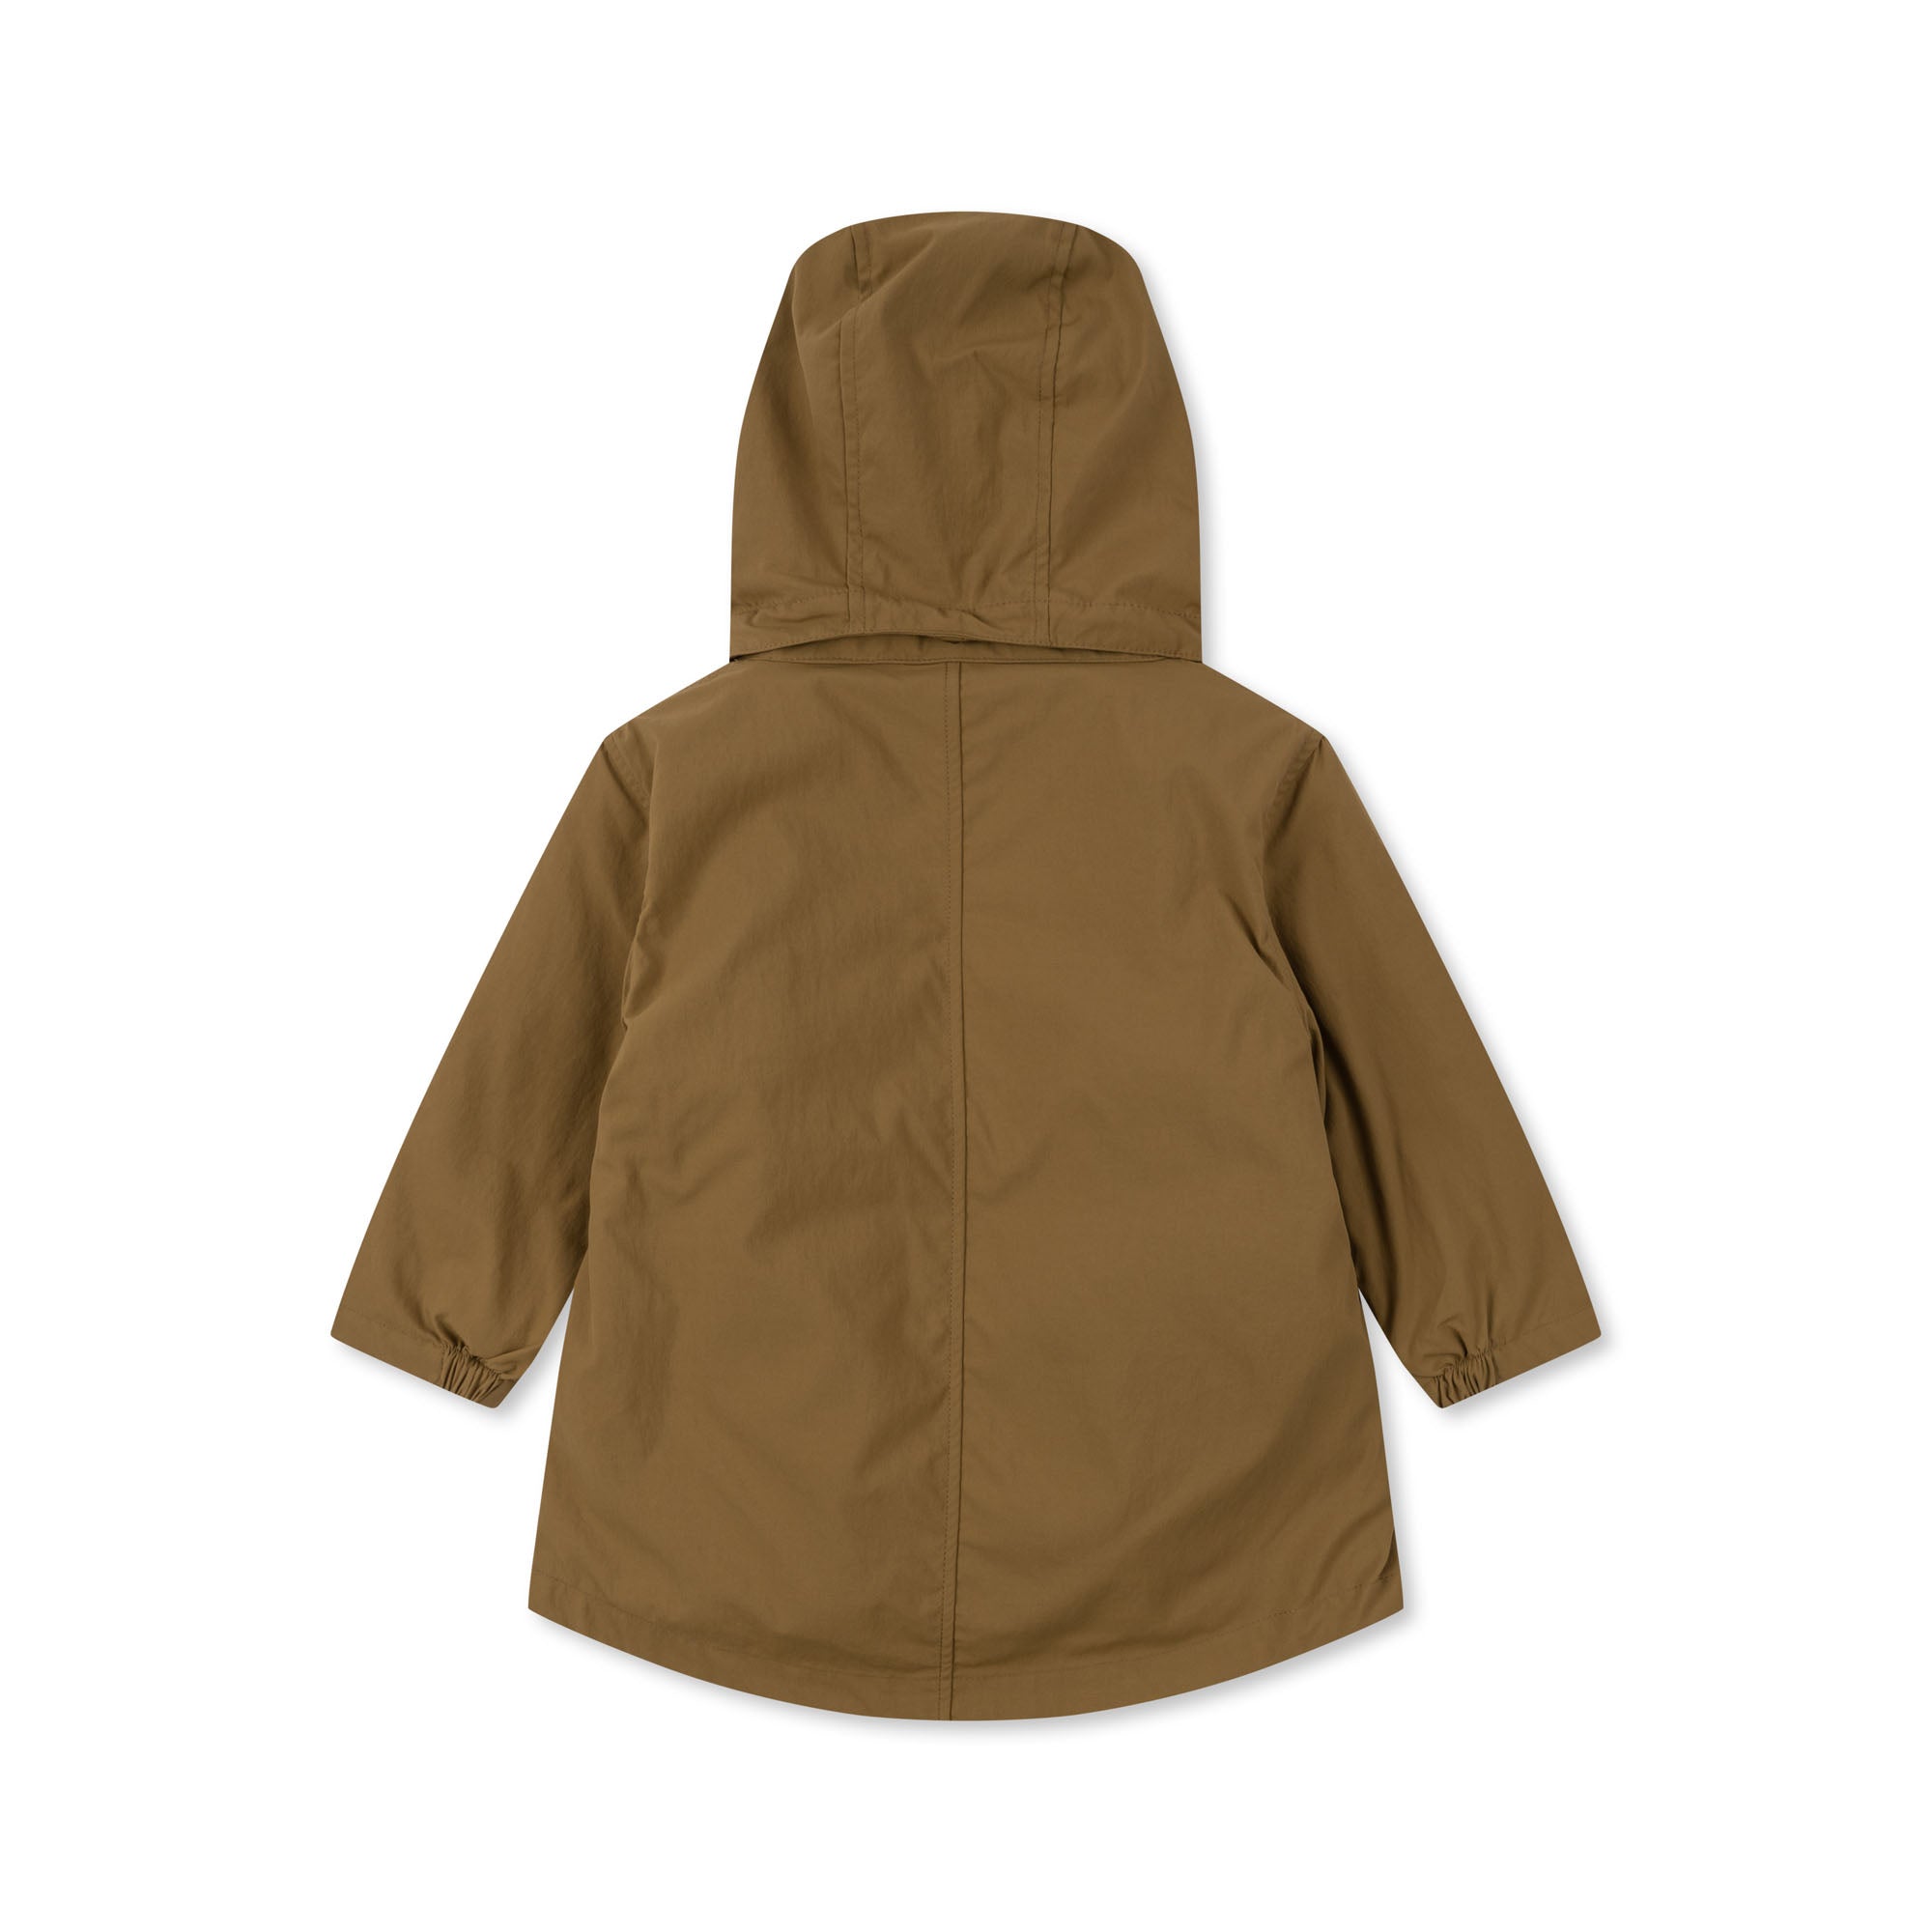 Anon 3-in-1 parka with a Konges Slojd thermal jacket